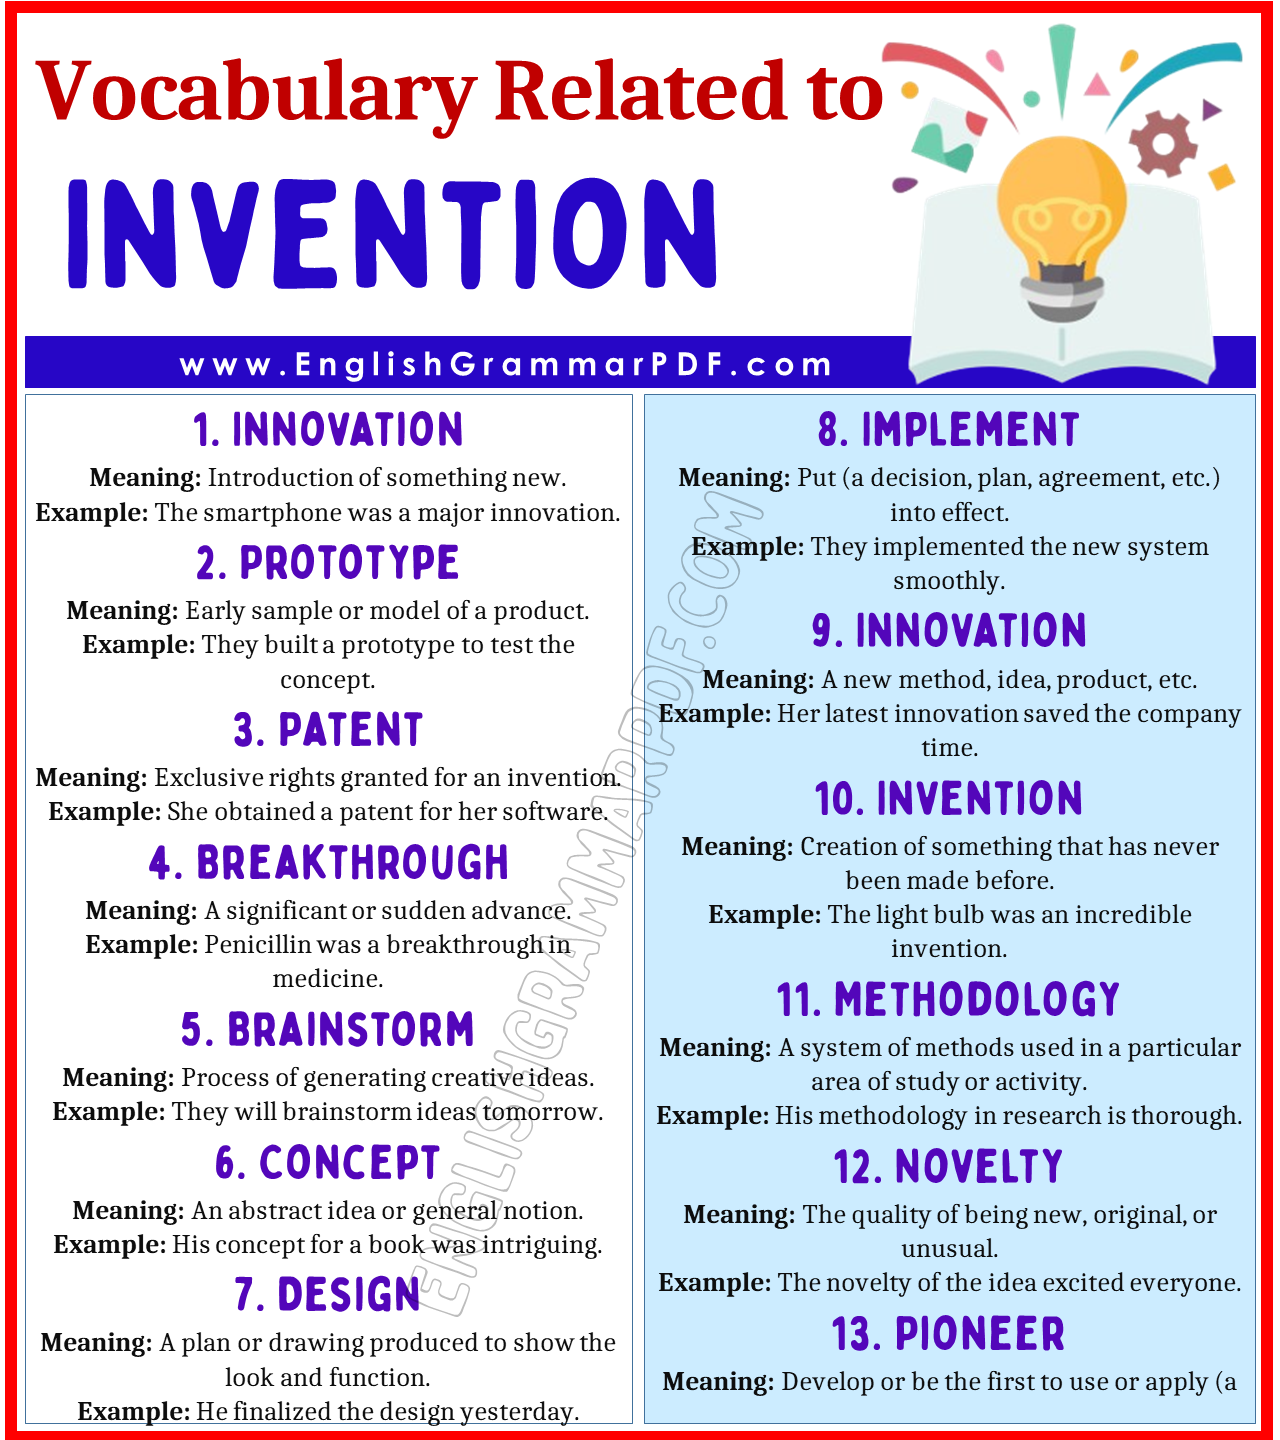 Vocabulary Words Related to Invention